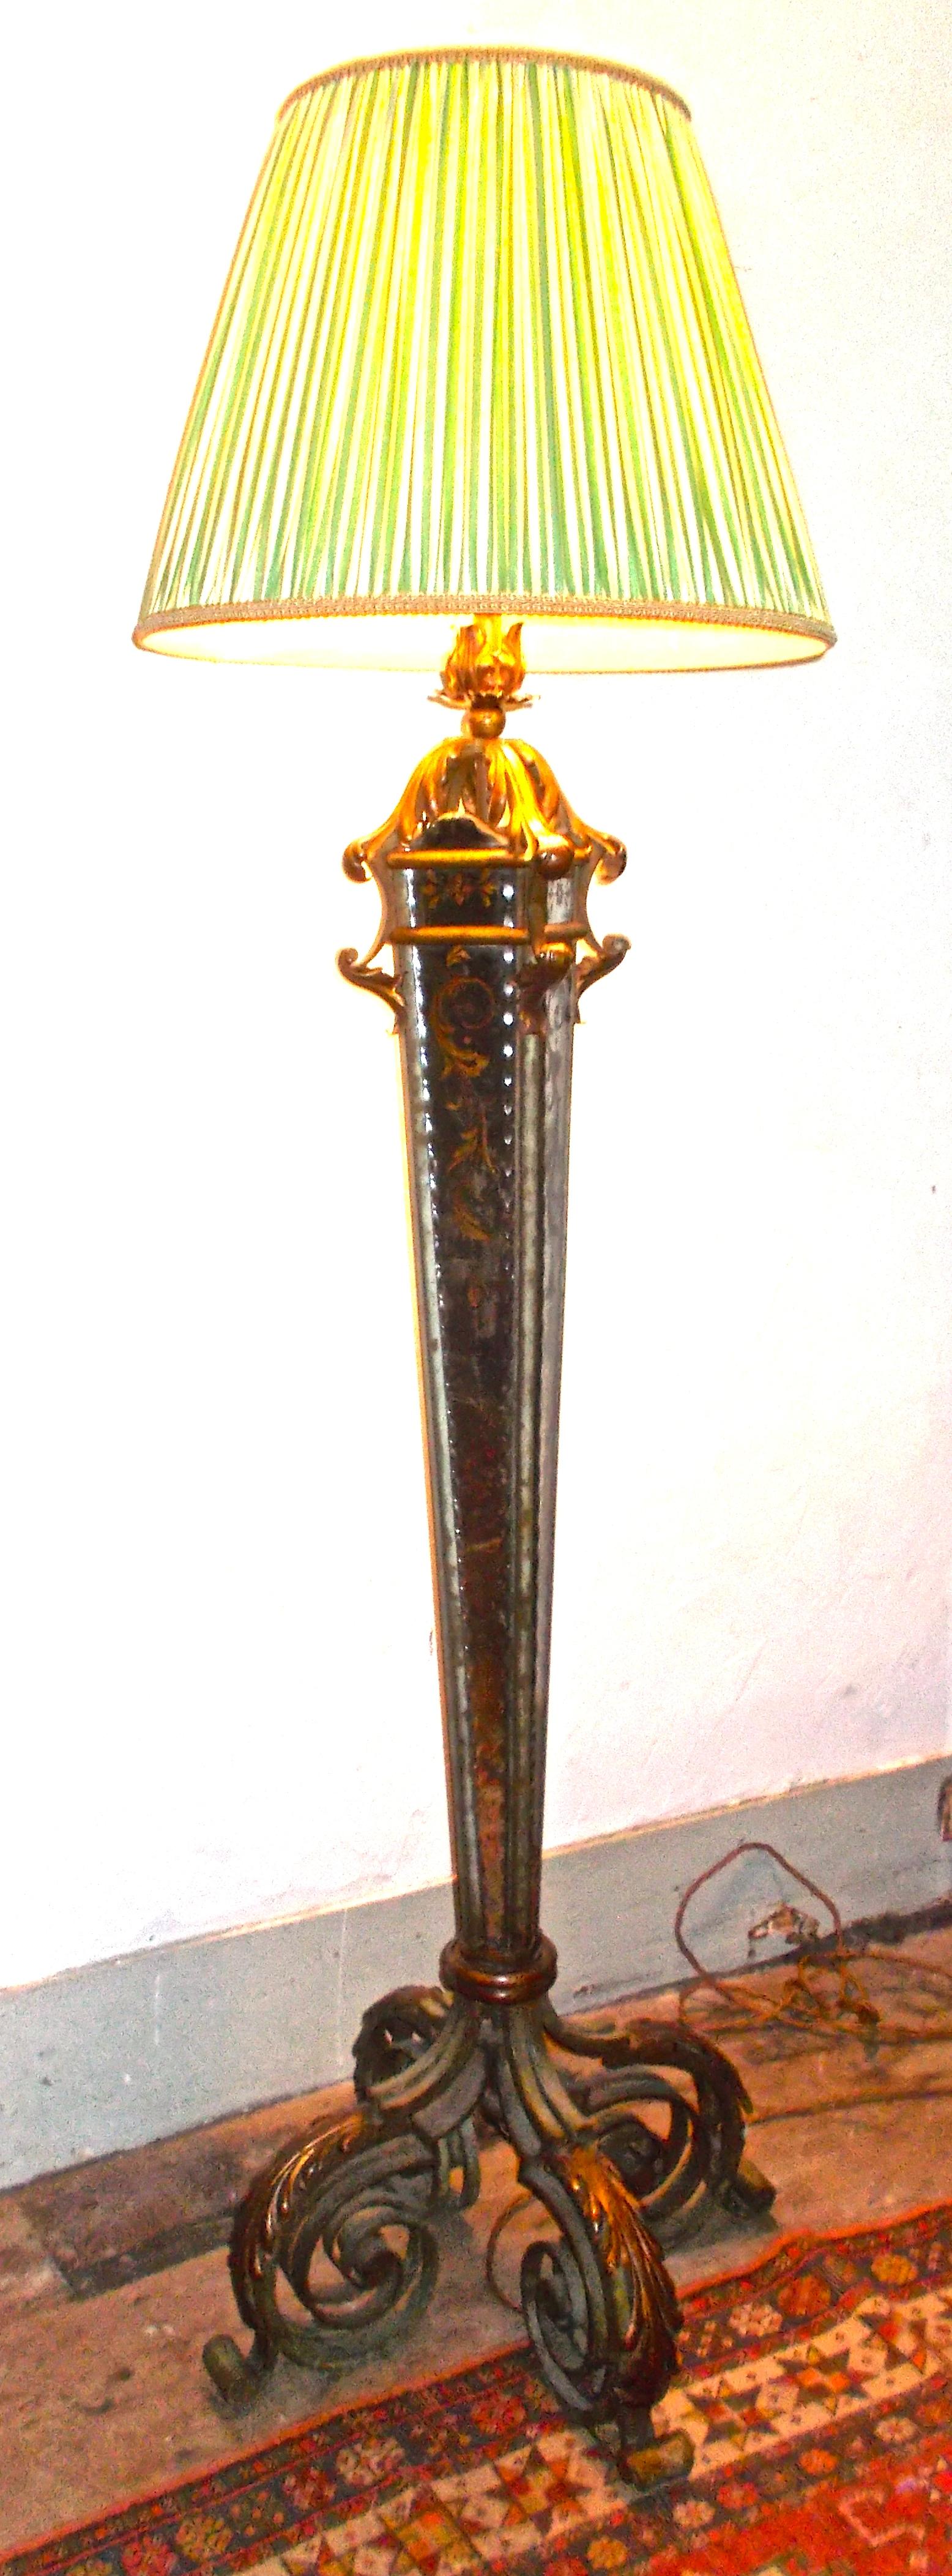 Mid-20th Century Serge Roche Attributed Parcel-Gilt Wrought Iron and Verre Églomisé Floor Lamp For Sale